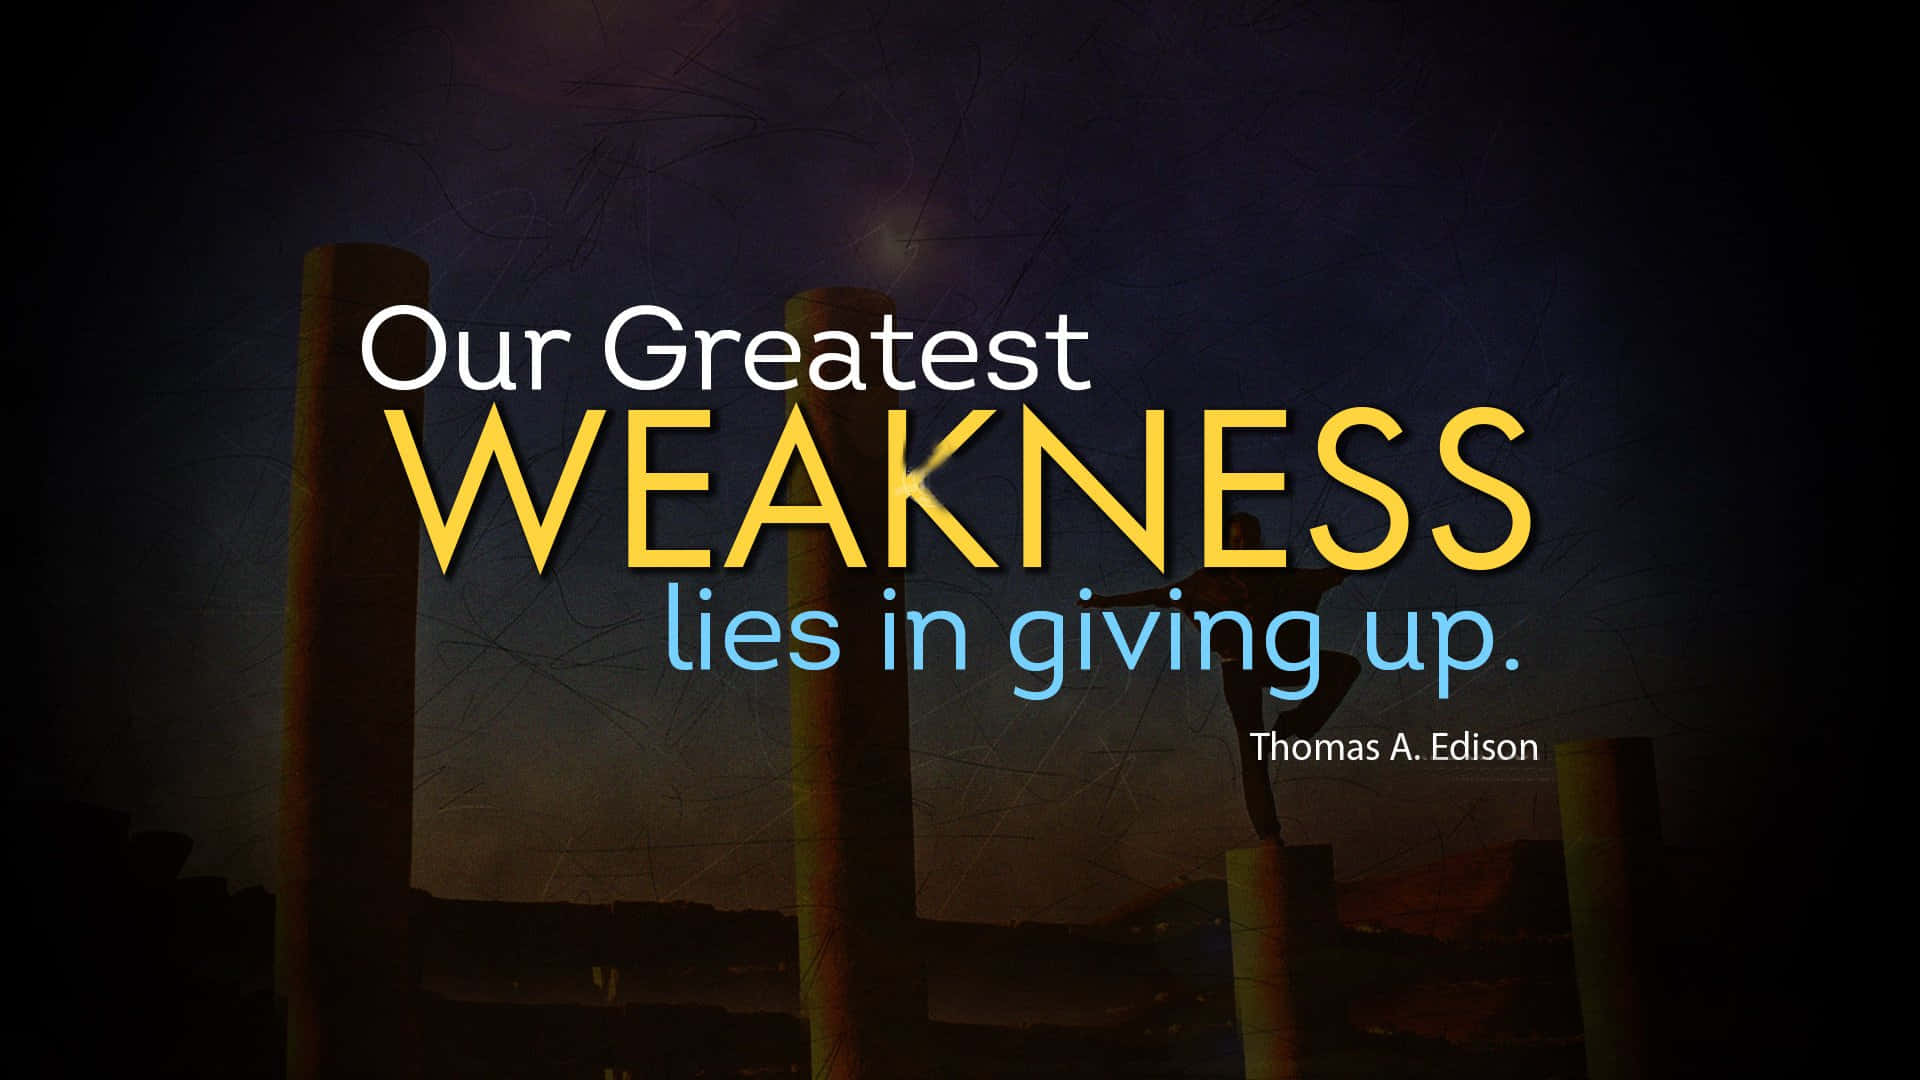 Inspirational Edison Weakness Quote Wallpaper